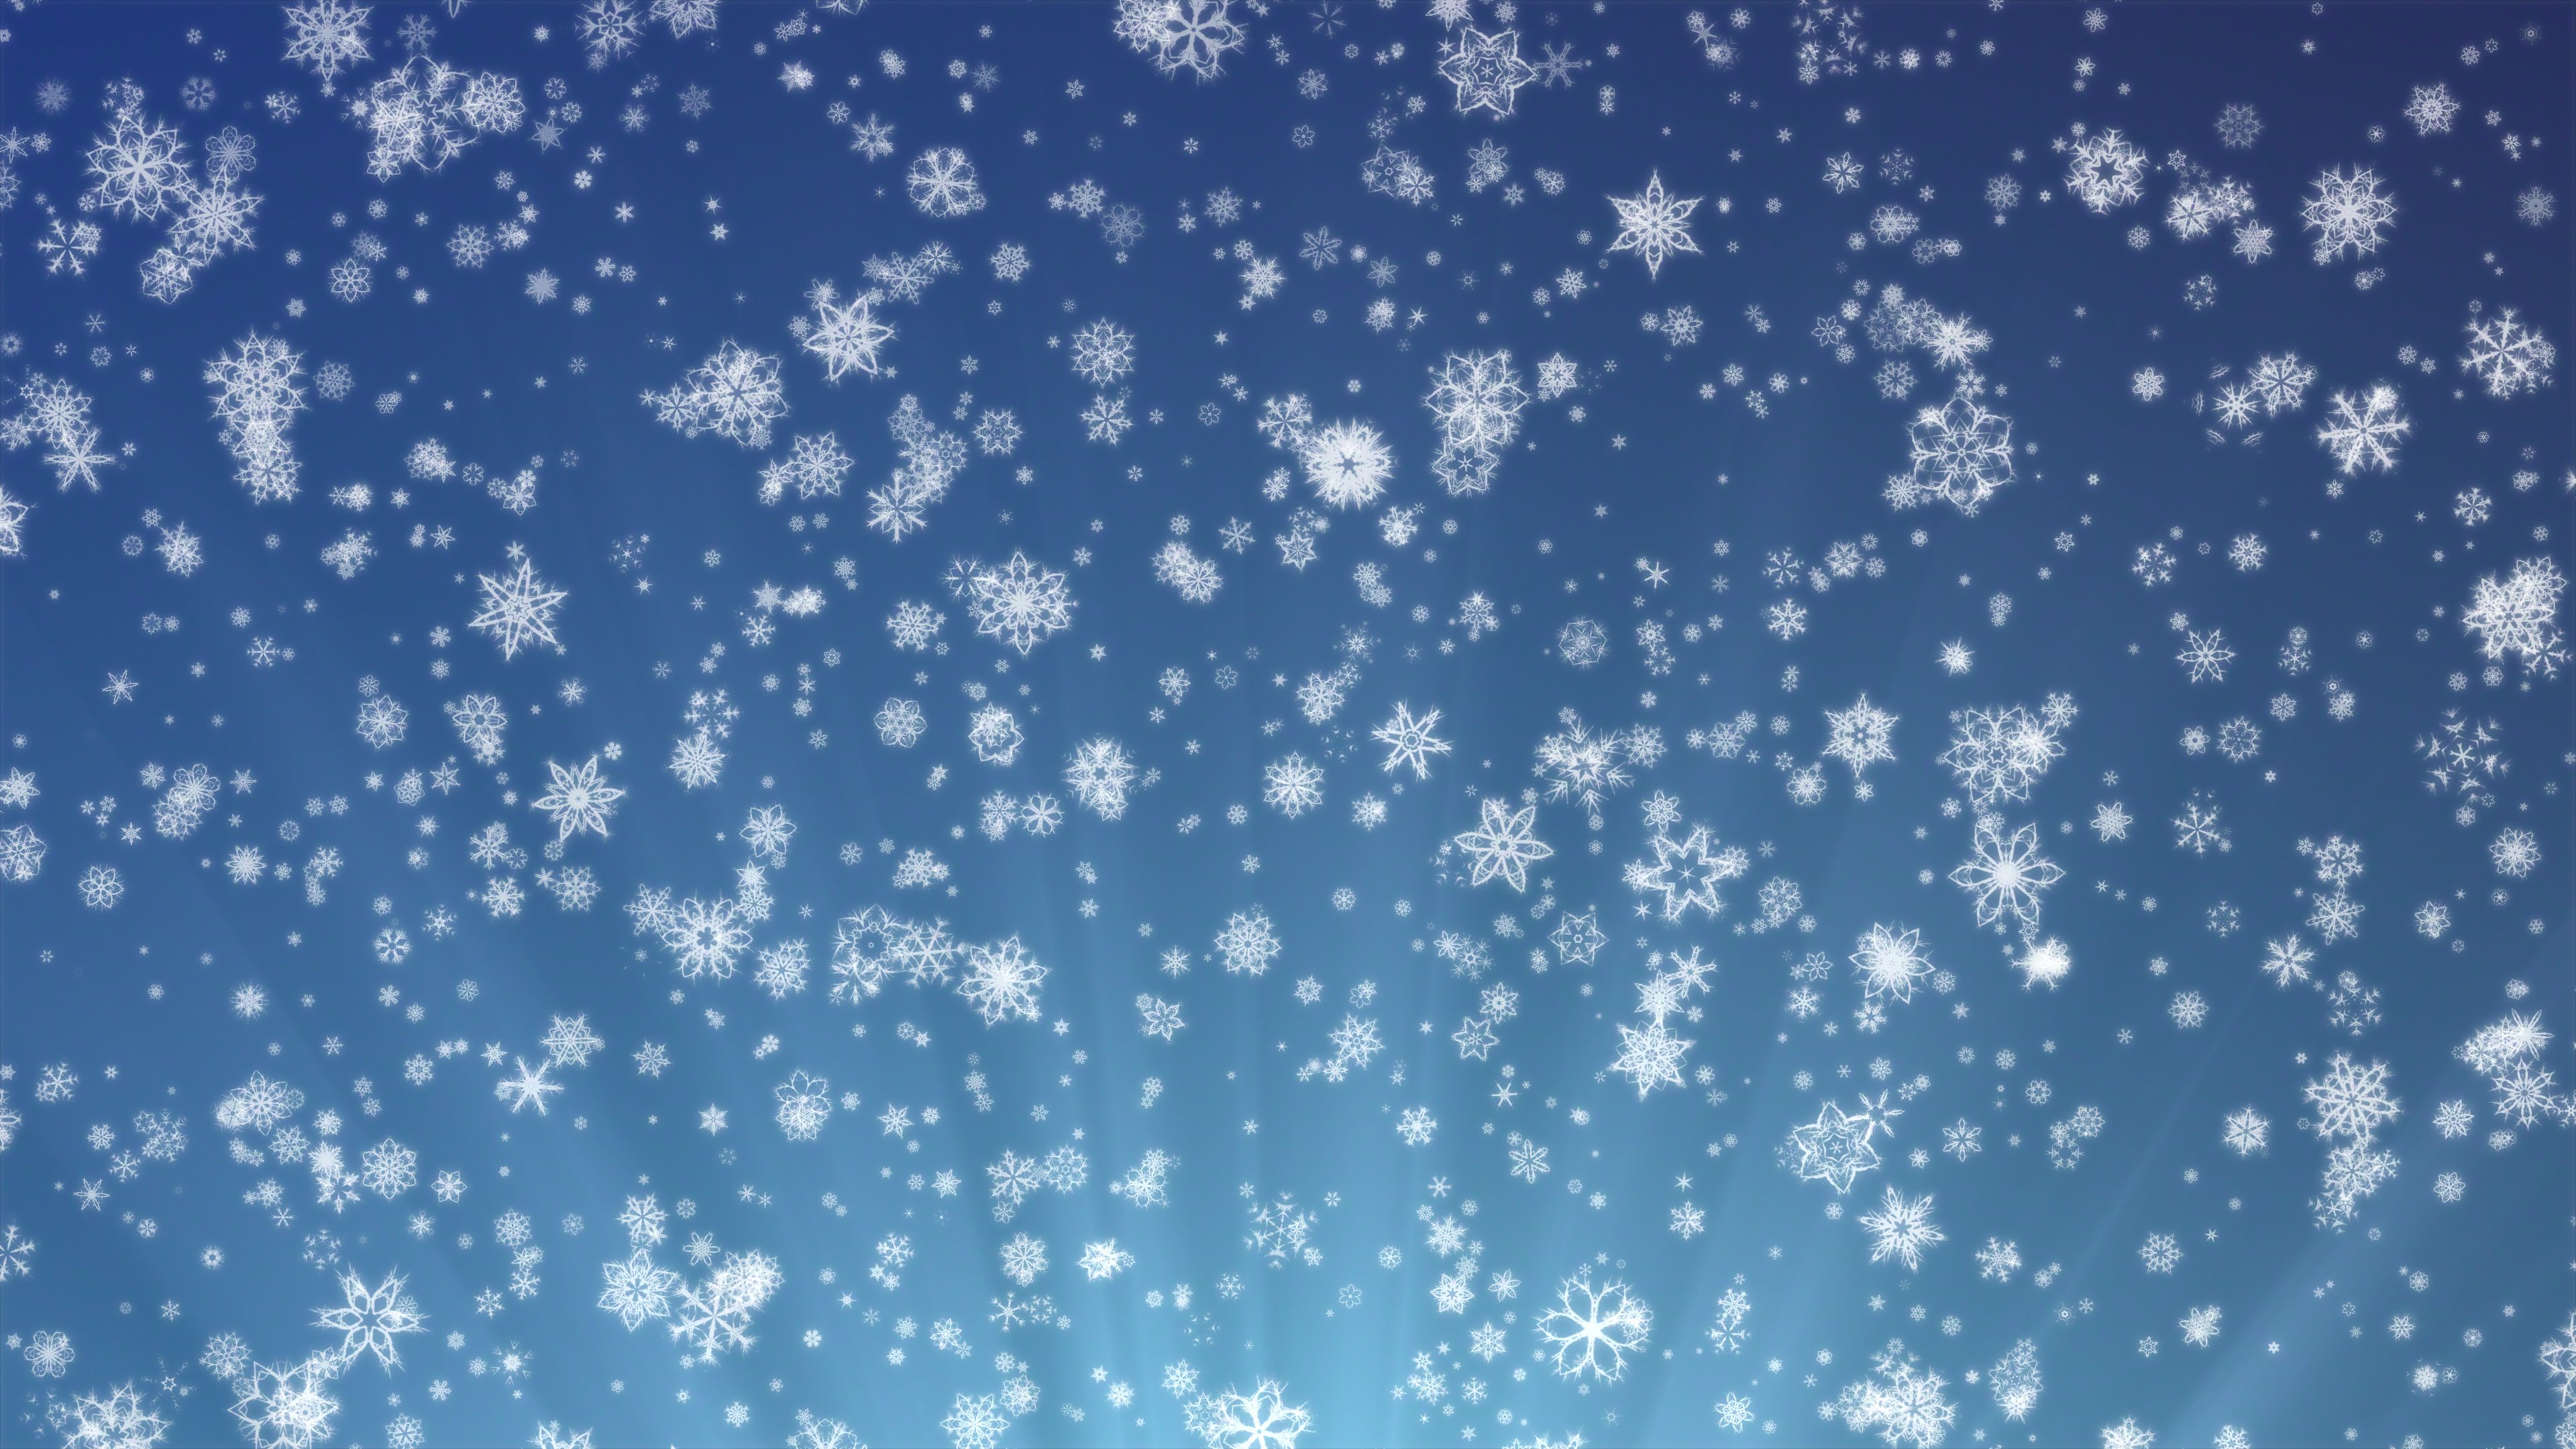 Moving Snowflakes Background